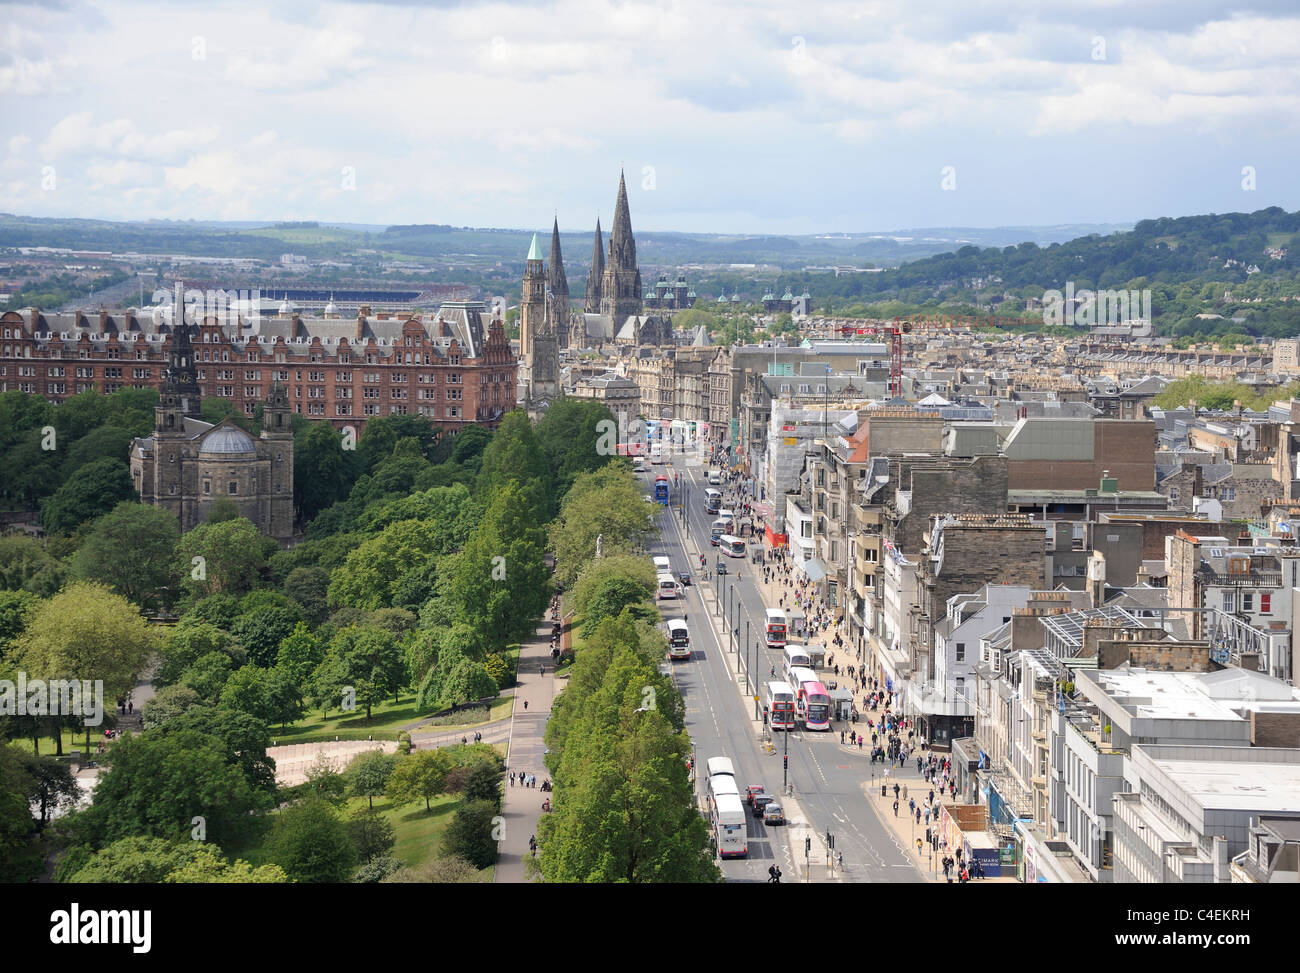 Princes Street, Edinburgh. Looking West from the top of the Scott Monument. To the left are Princes Street Gardens. Stock Photo